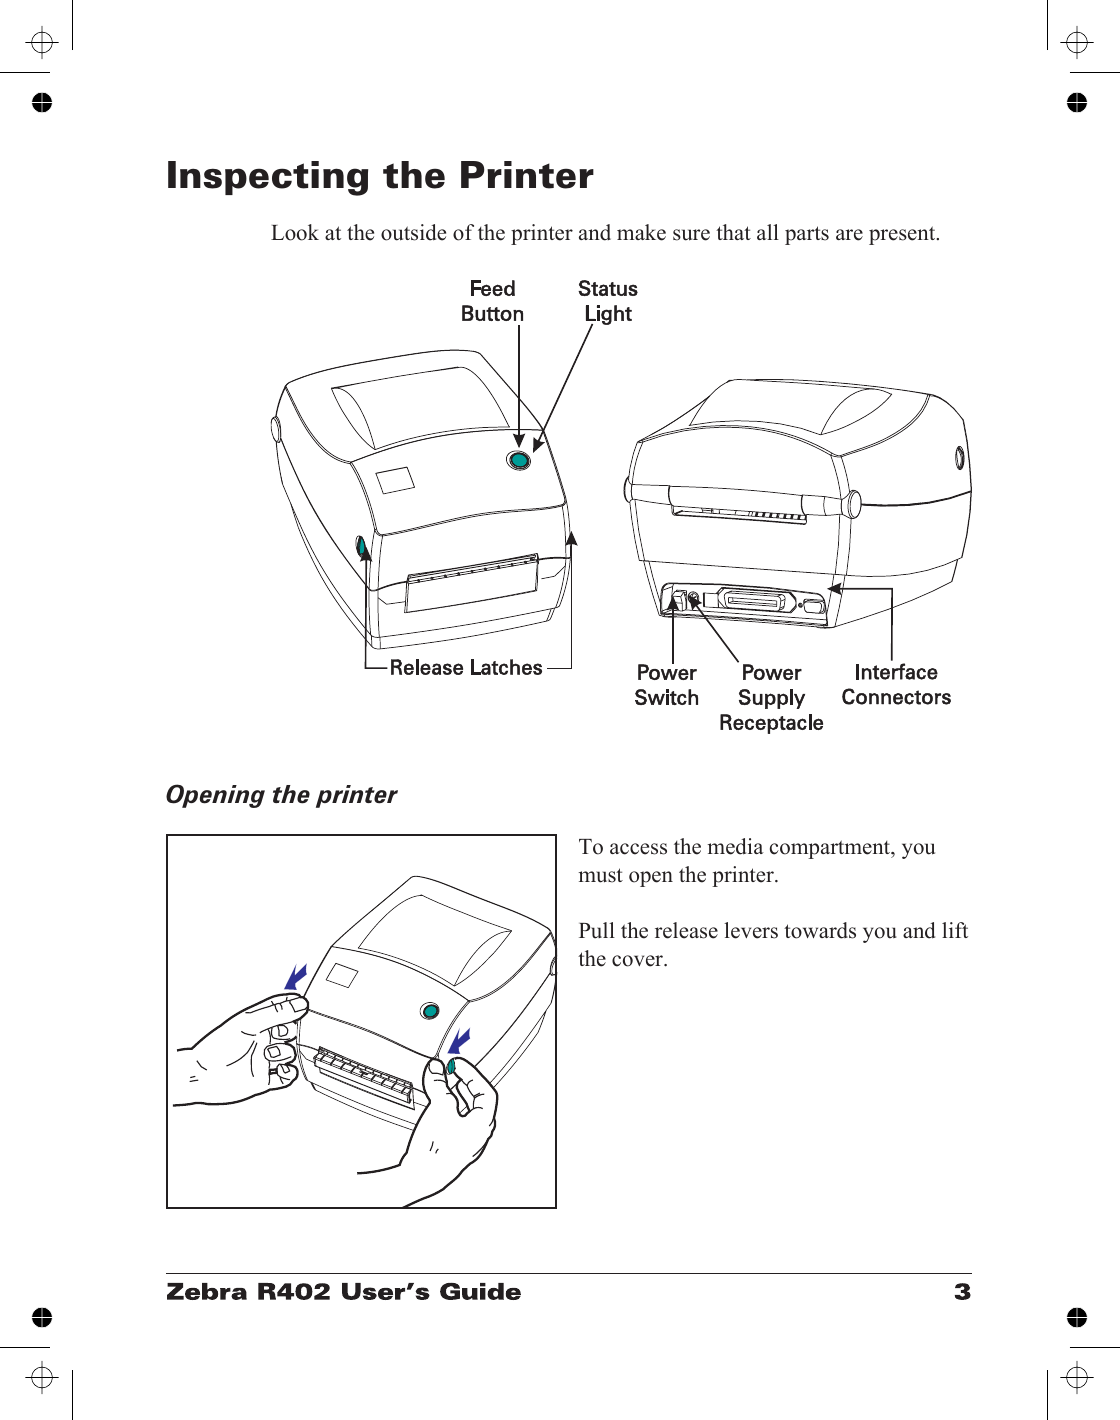 Inspecting the PrinterLook at the outside of the printer and make sure that all parts are present.Opening the printerTo access the media compartment, youmust open the printer.Pull the release levers towards you and liftthe cover.